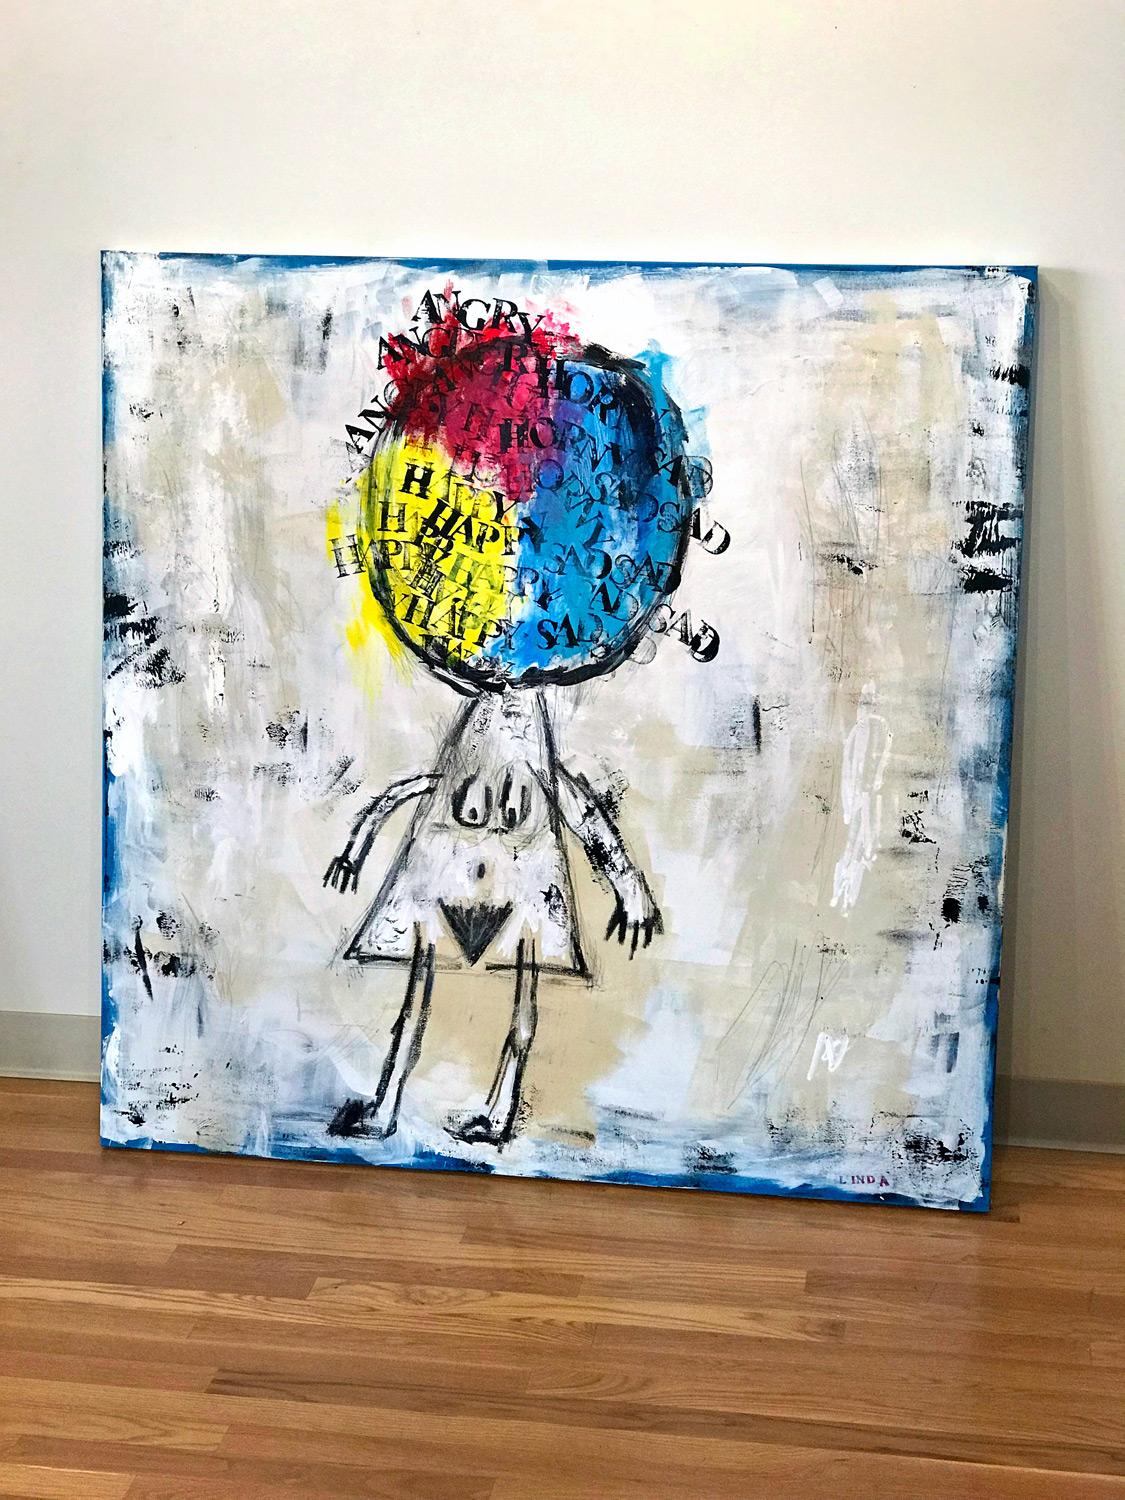 "HAPPY SAD ANGRY HORNY" (2016) by Linda Zacks is a mixed media piece on canvas, measuring 48x48 inches. 

Linda is an artist working with representational and abstract urban themes and textures.  Linda Zacks is part paint, part poetry. Nothing is